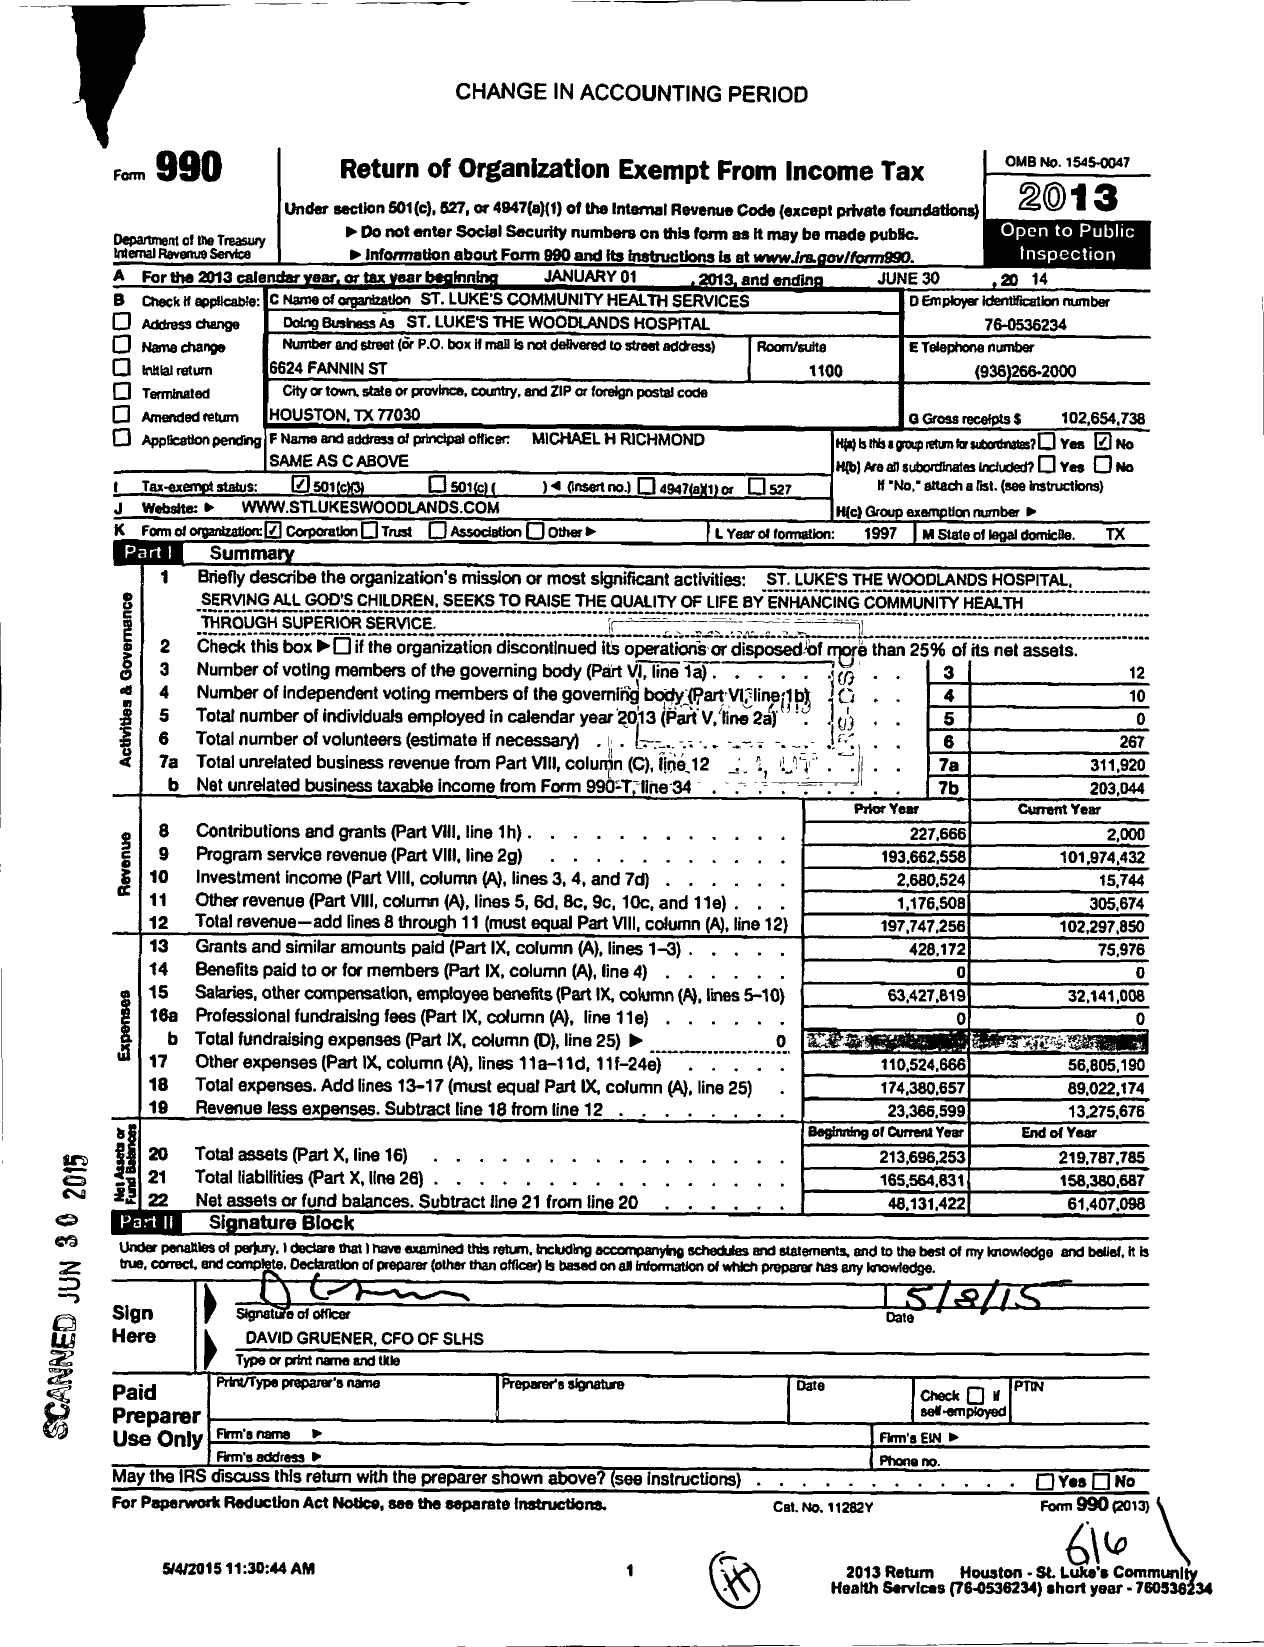 Image of first page of 2013 Form 990 for CHI ST LUKE'S Health THE Woodlands Hospital